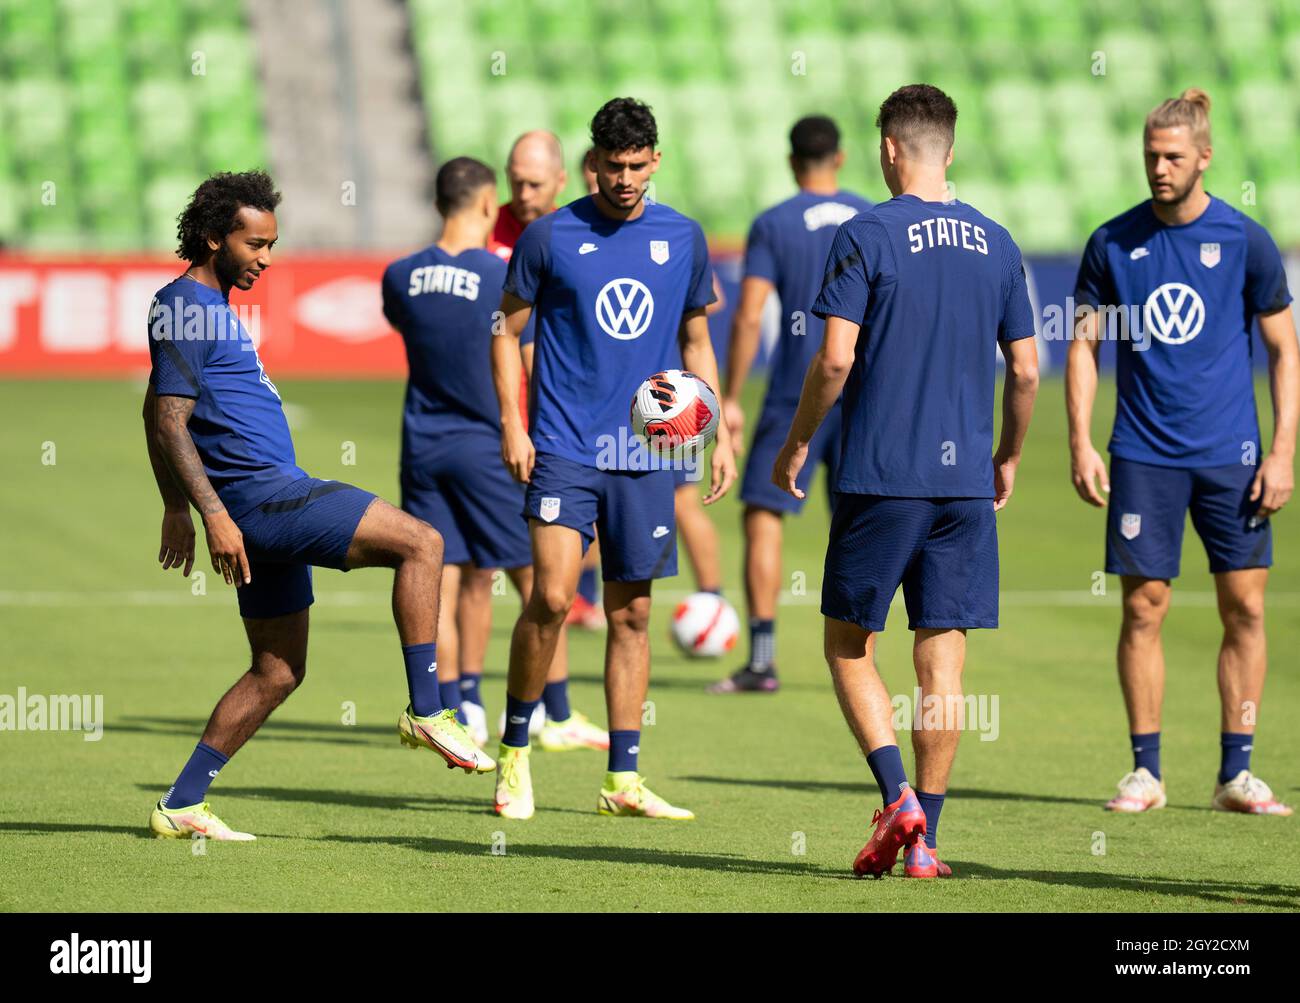 Austin, Texas, USA. 6th October, 2021. Members of the United States Men's National Team (USMNT) warm up for practice at Austin's Q2 stadium on Wednesday, October 6, 2021. The U.S. team will face Jamaica on Thursday in a World Cup qualifying match. Credit: Bob Daemmrich/Alamy Live News Stock Photo